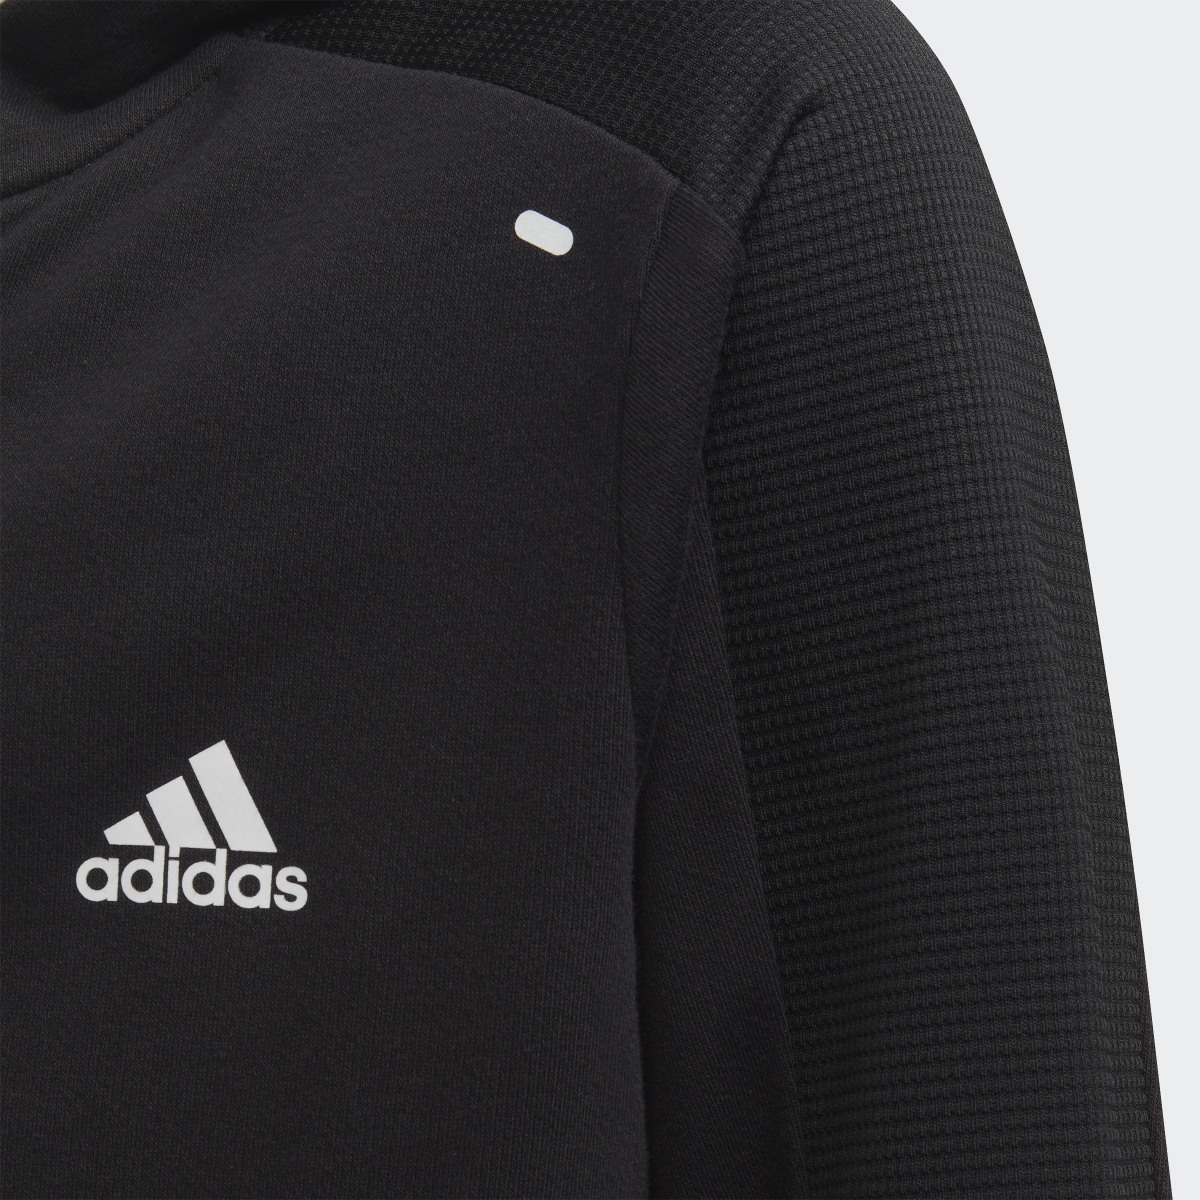 Adidas XFG Techy Inspired Summer Track Top. 4